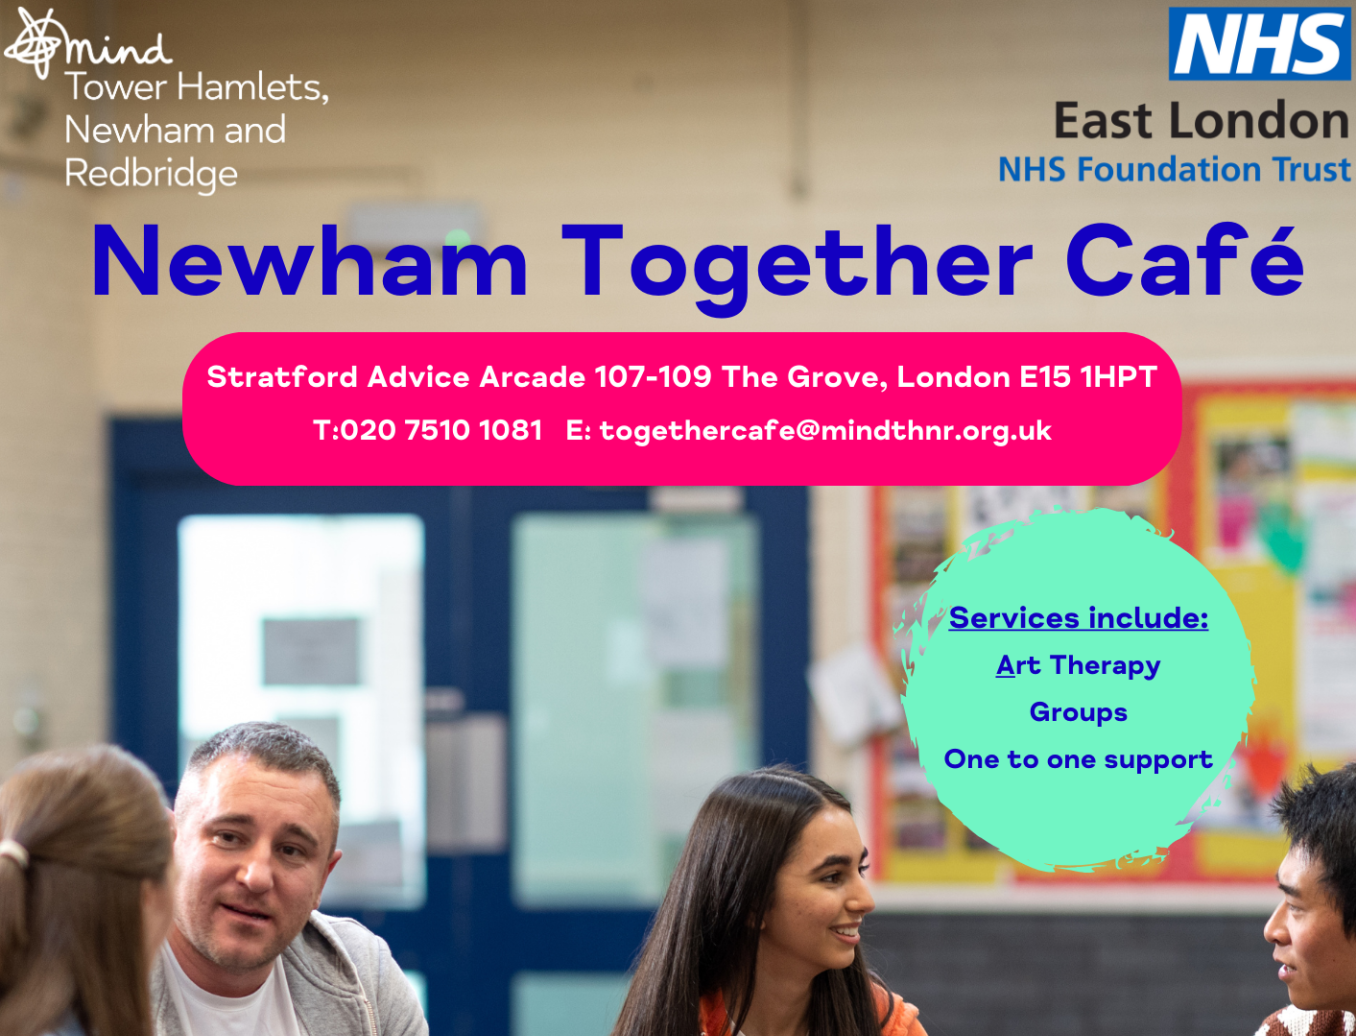 Newham Together Café is open!